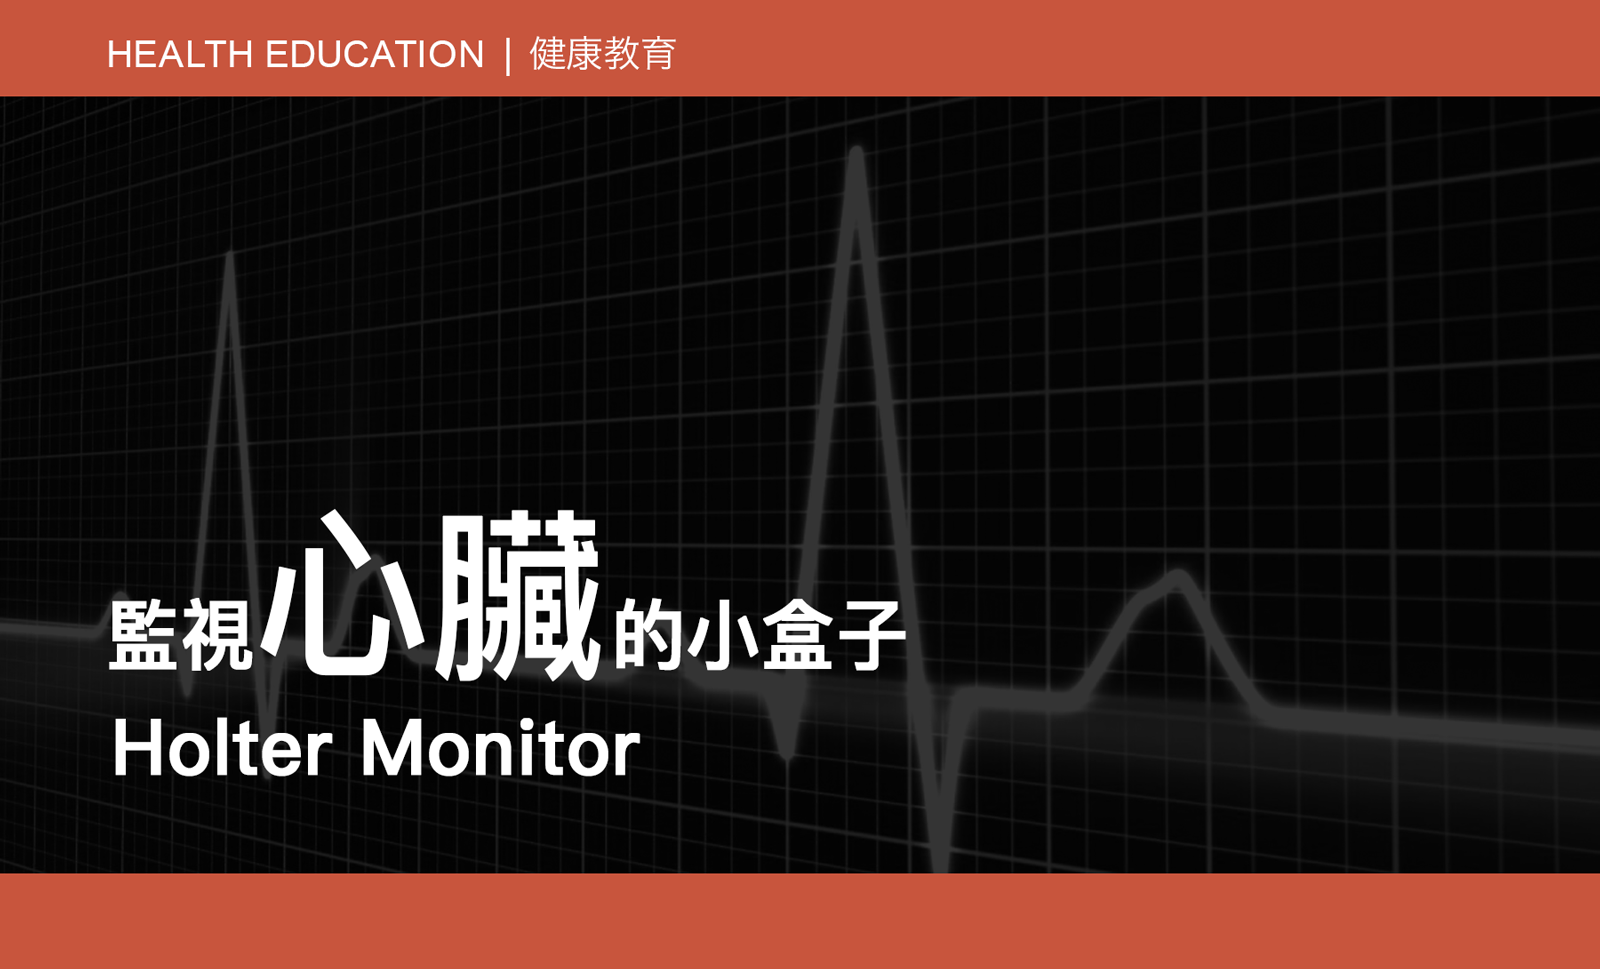 CAIPA Health Article - Holter Monitor